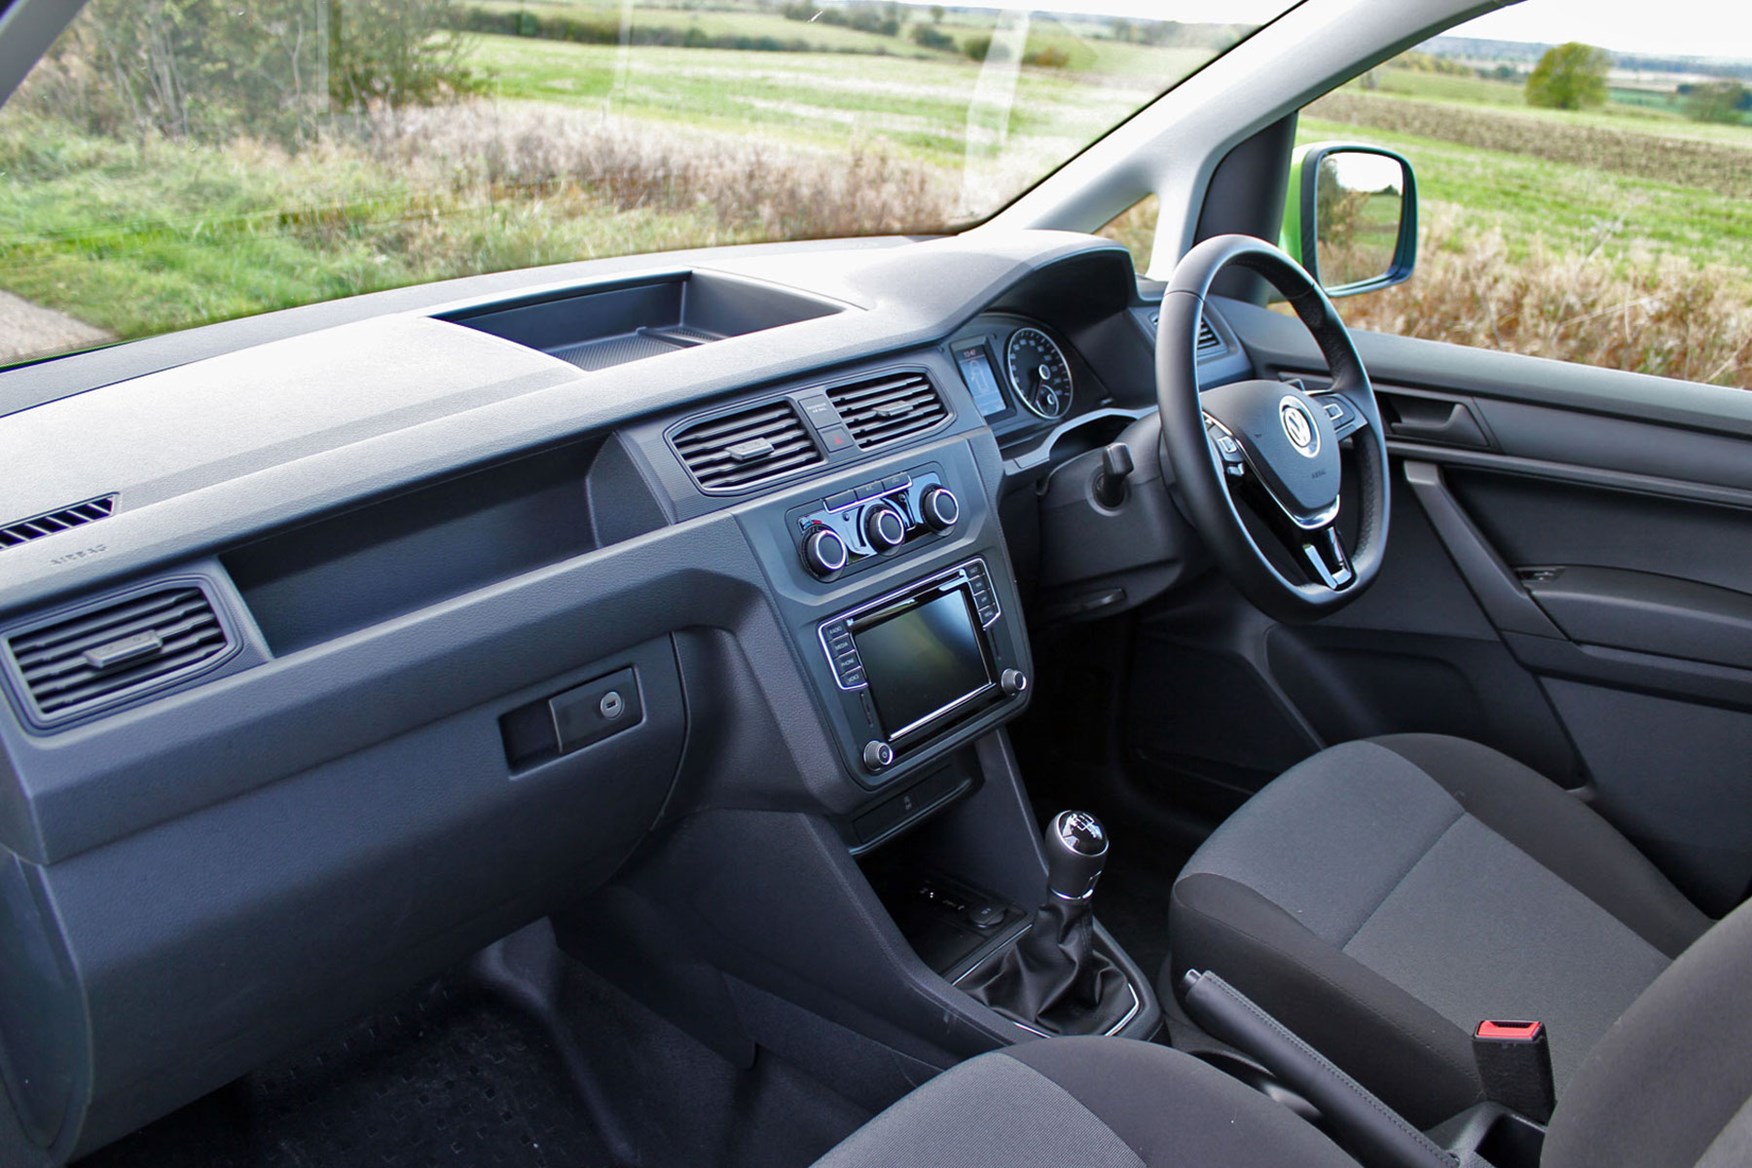 VW Caddy 1.0-litre TSI 102 review - cab interior, 2017